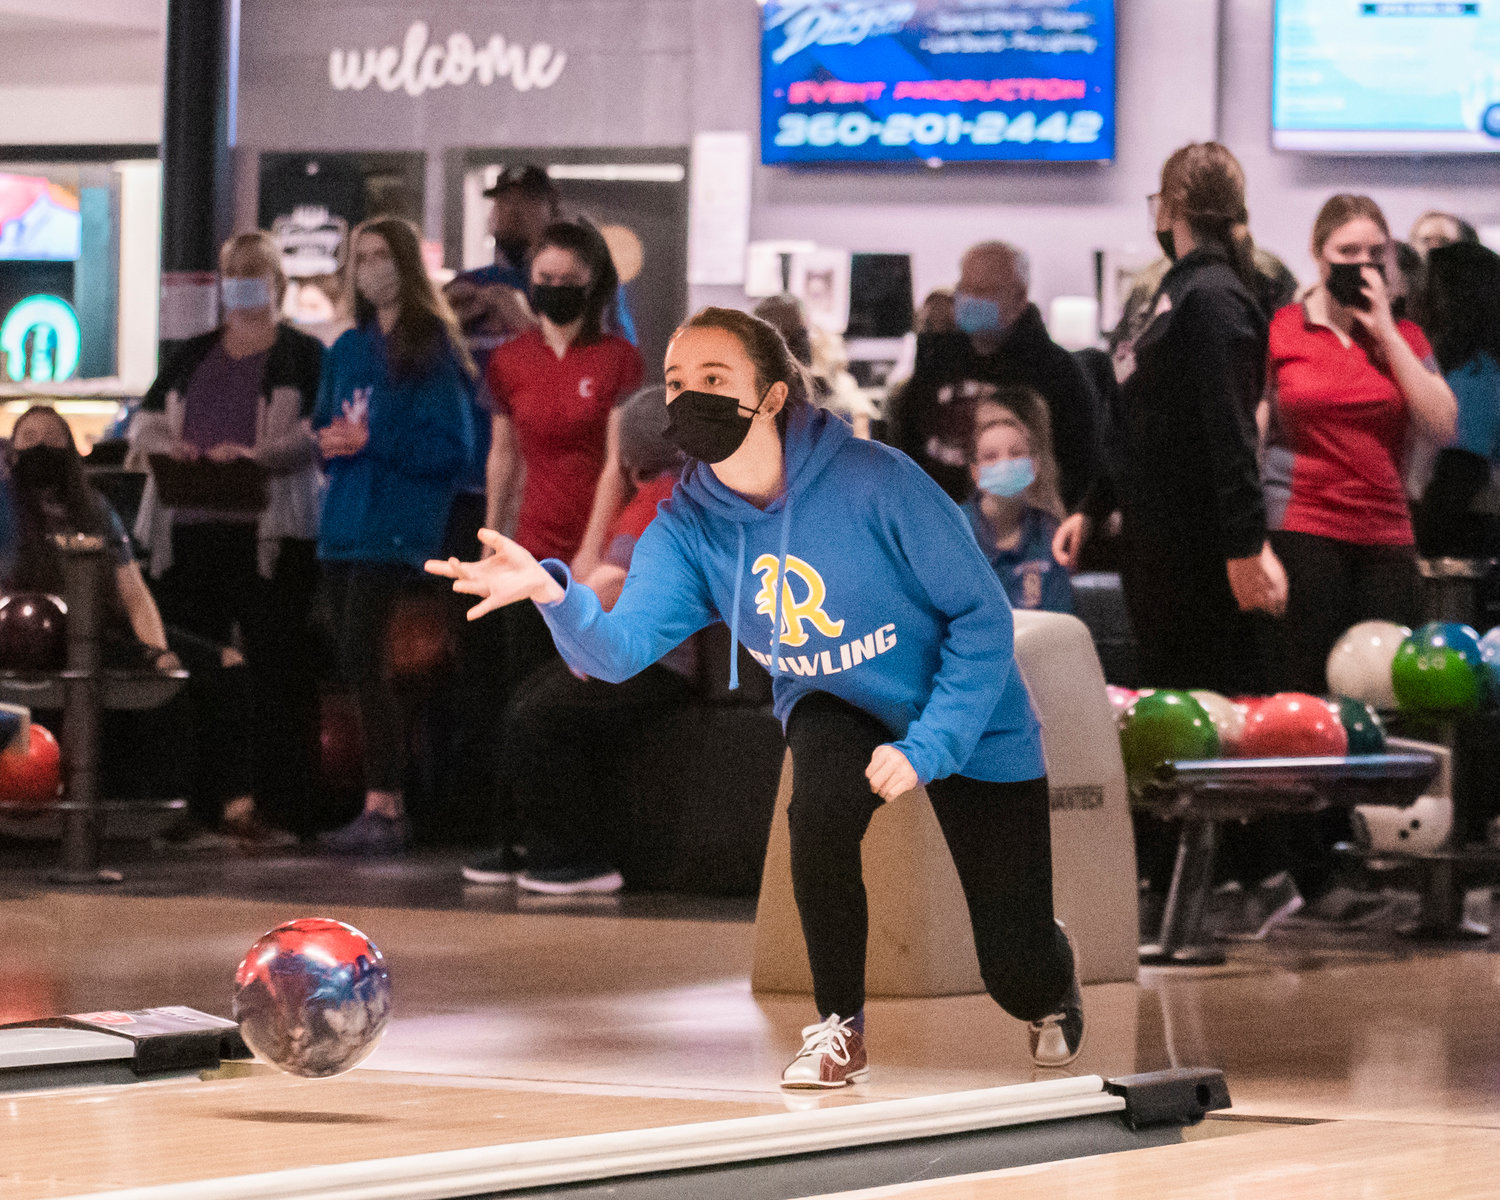 Rochester’s Krya Smith bowls at Fairway Lanes in Centralia on Thursday alongside athletes from W.F. West.